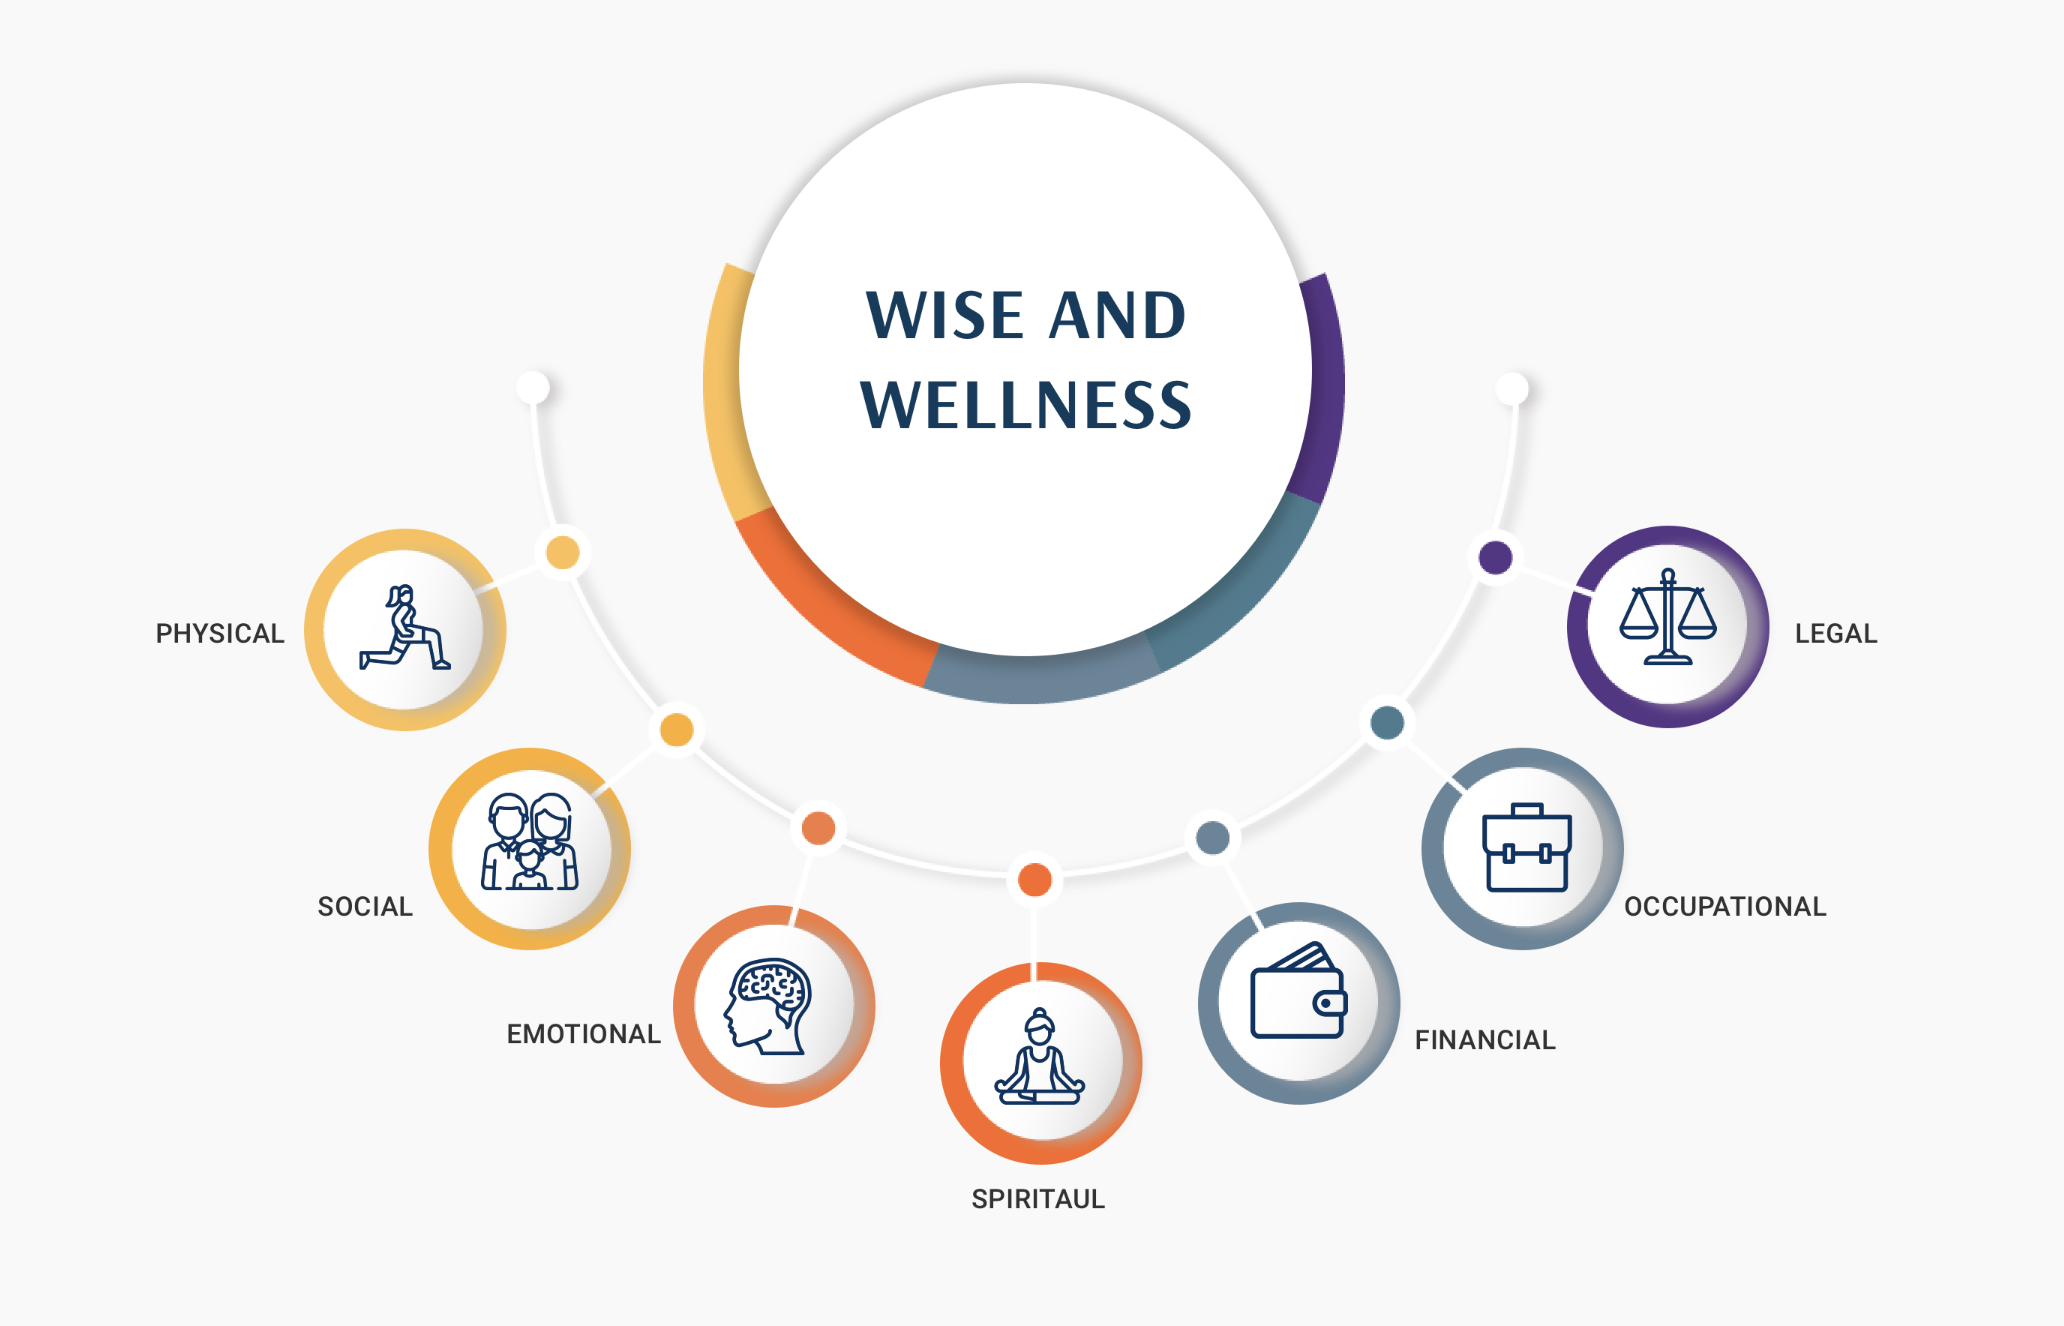 Momentum Group's Wise And Well Programme focuses on all aspects of wellness, including physical, social, emotional, spiritual, financial, occupational and legal.